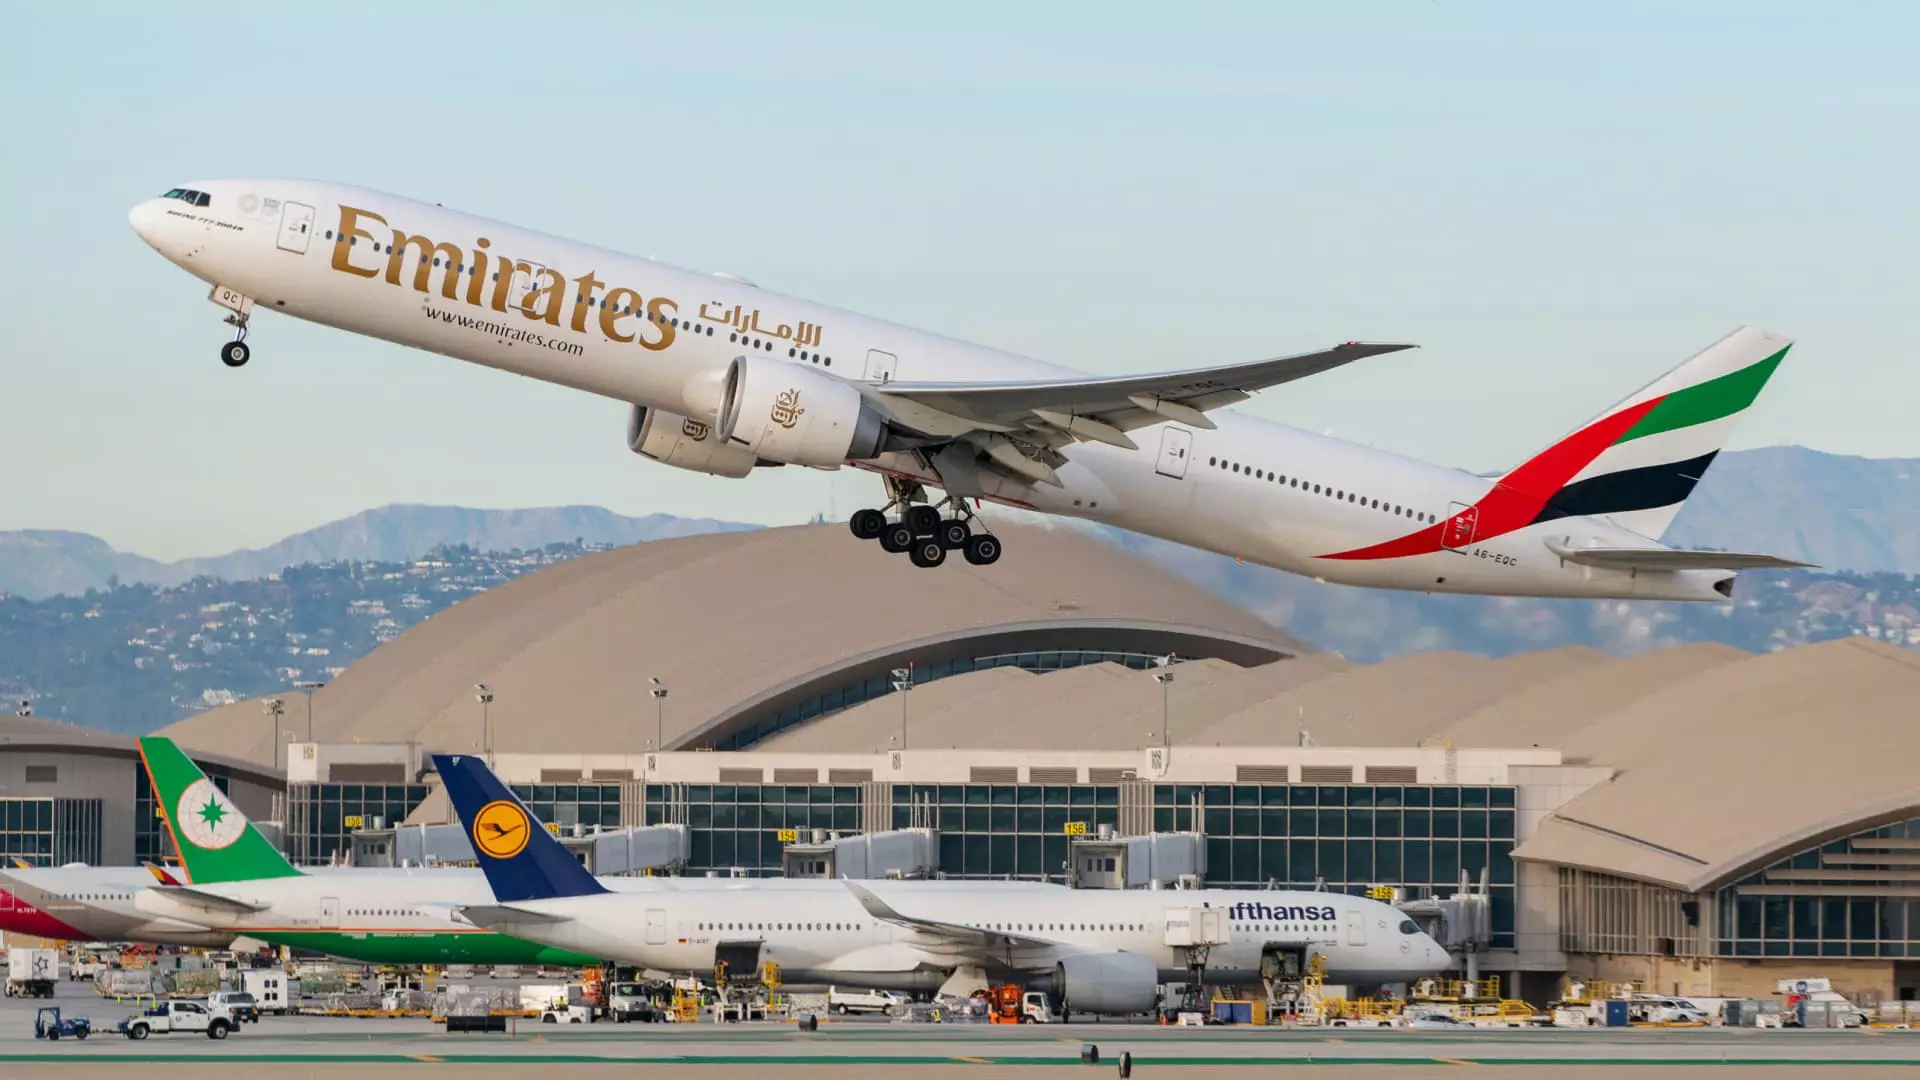 Emirates Airline Expresses Frustration with Boeing Safety Crisis